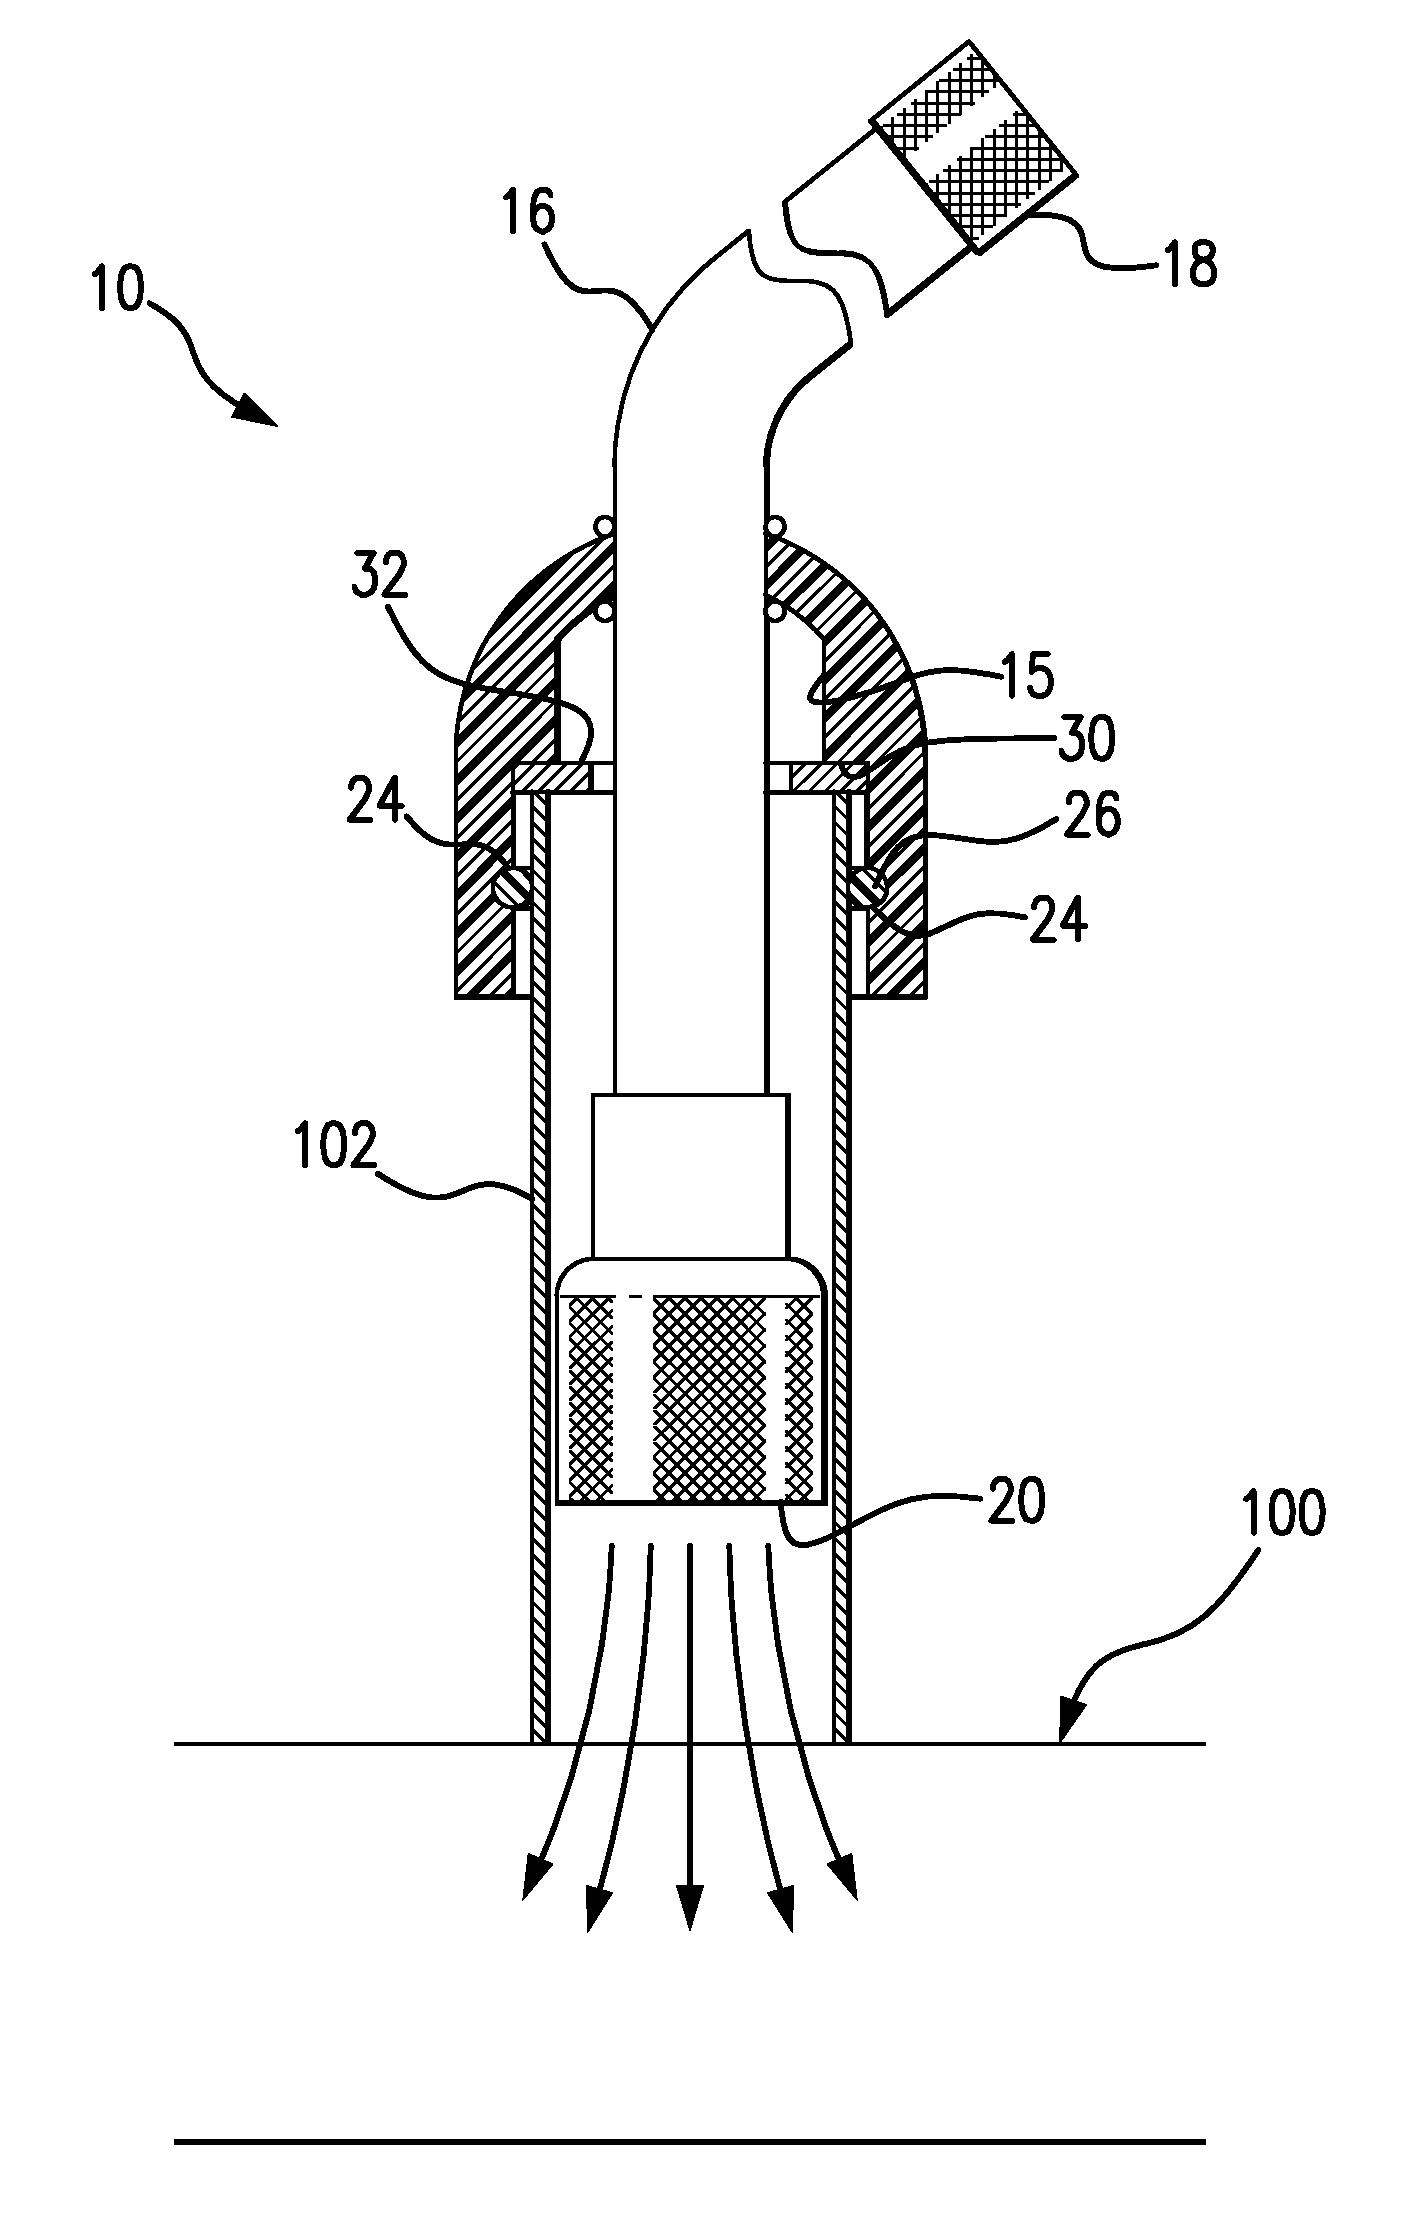 Hose attachment device for clearing drain lines